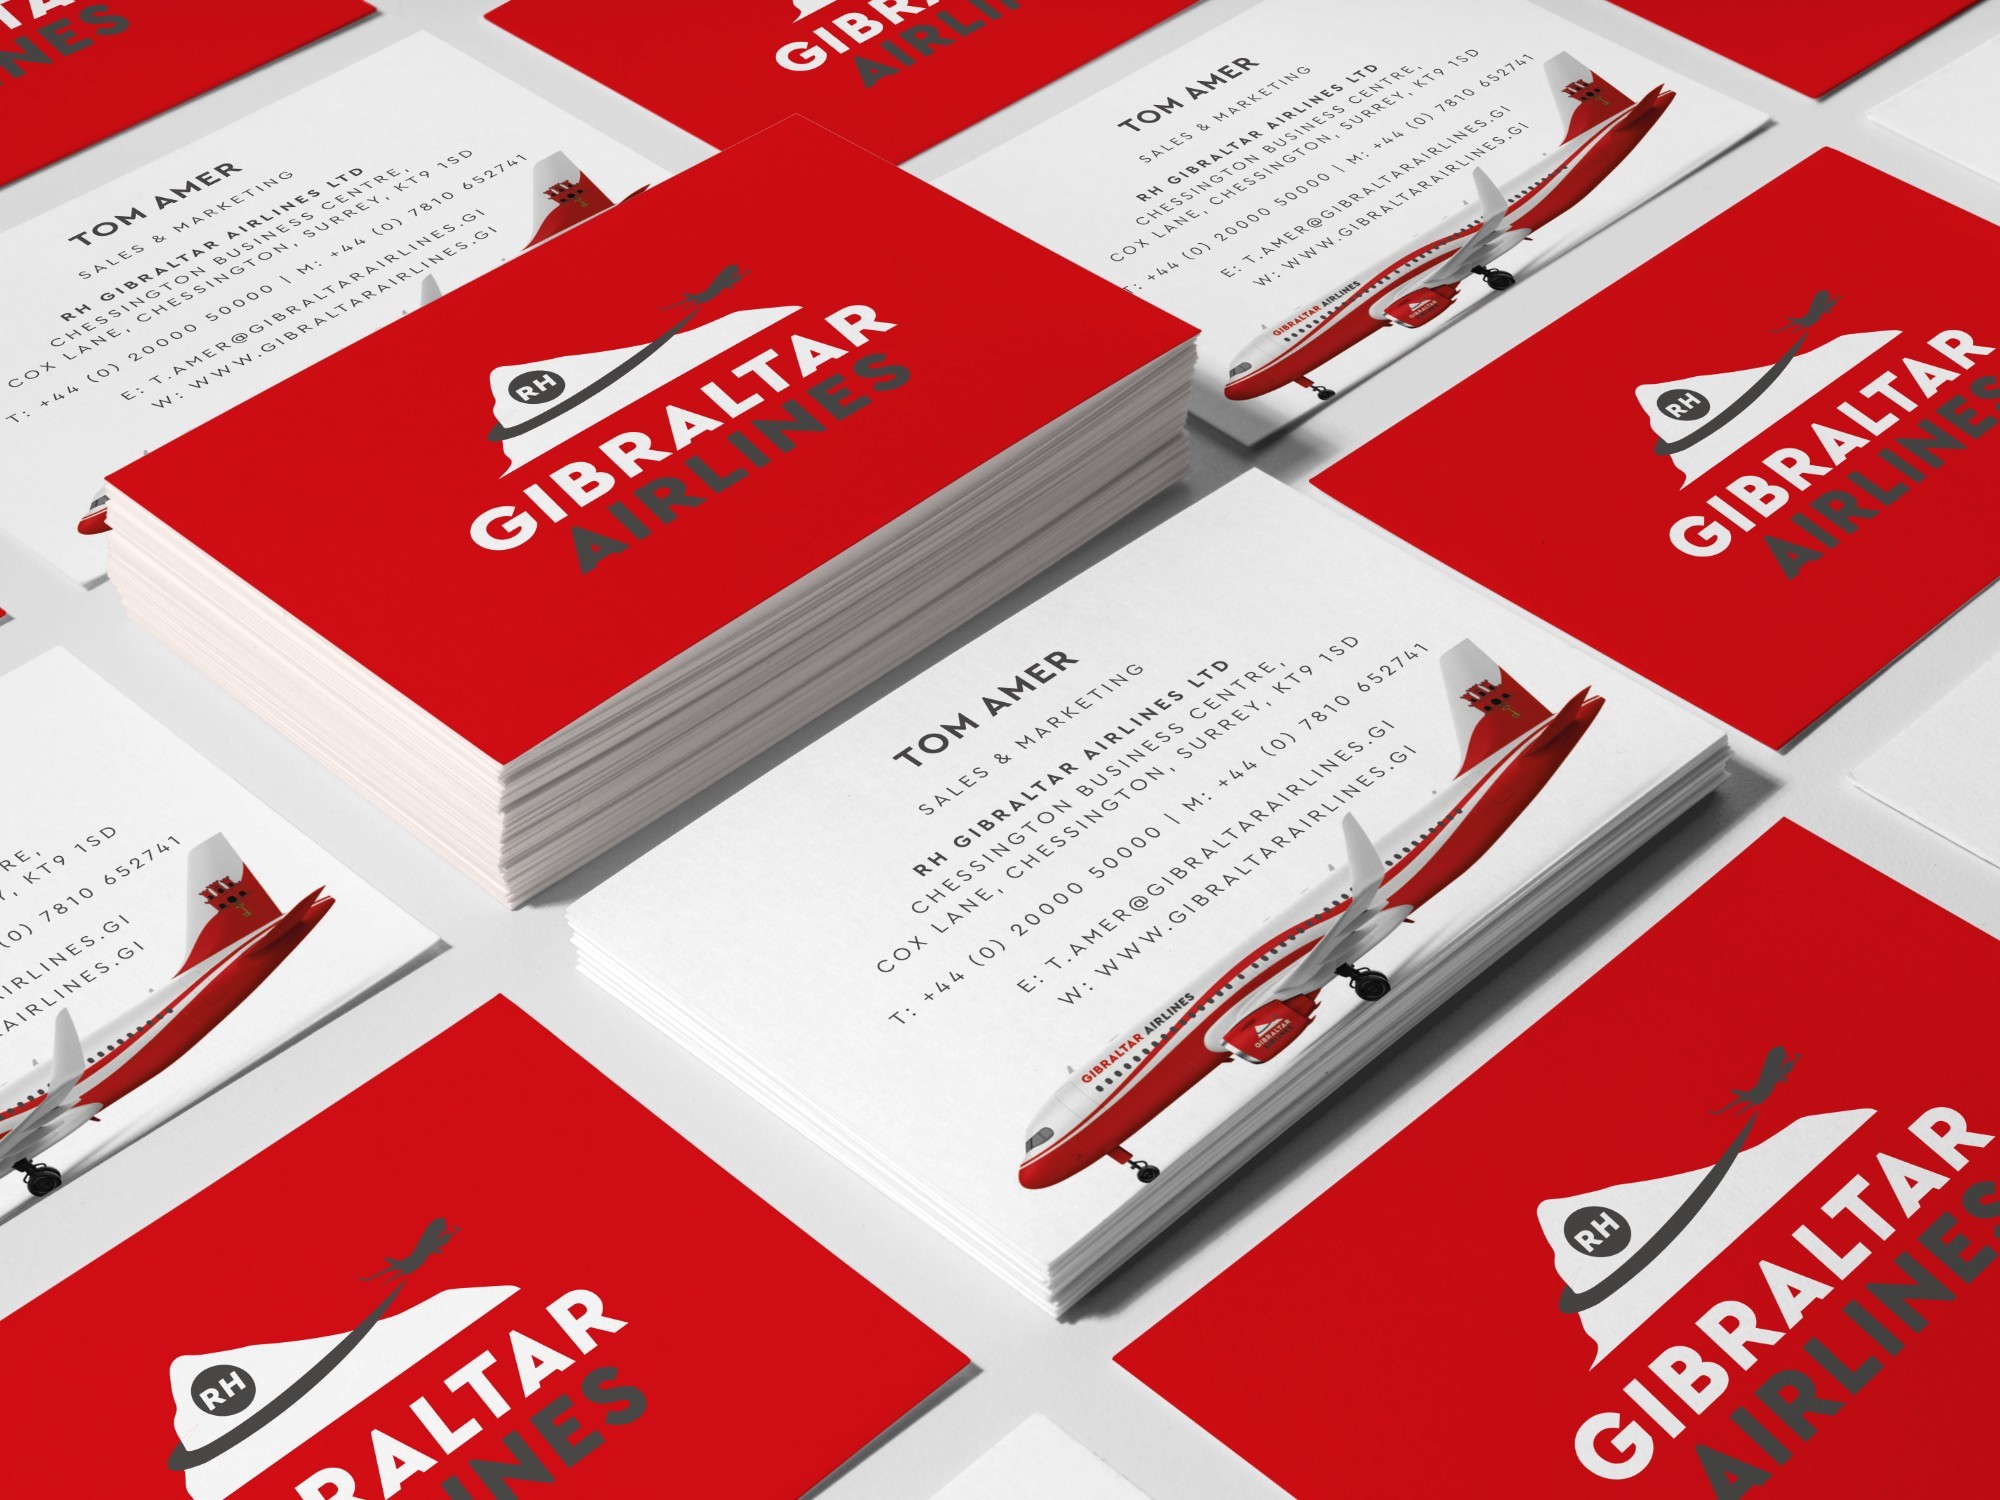 Gibraltar Airlines | Business cards